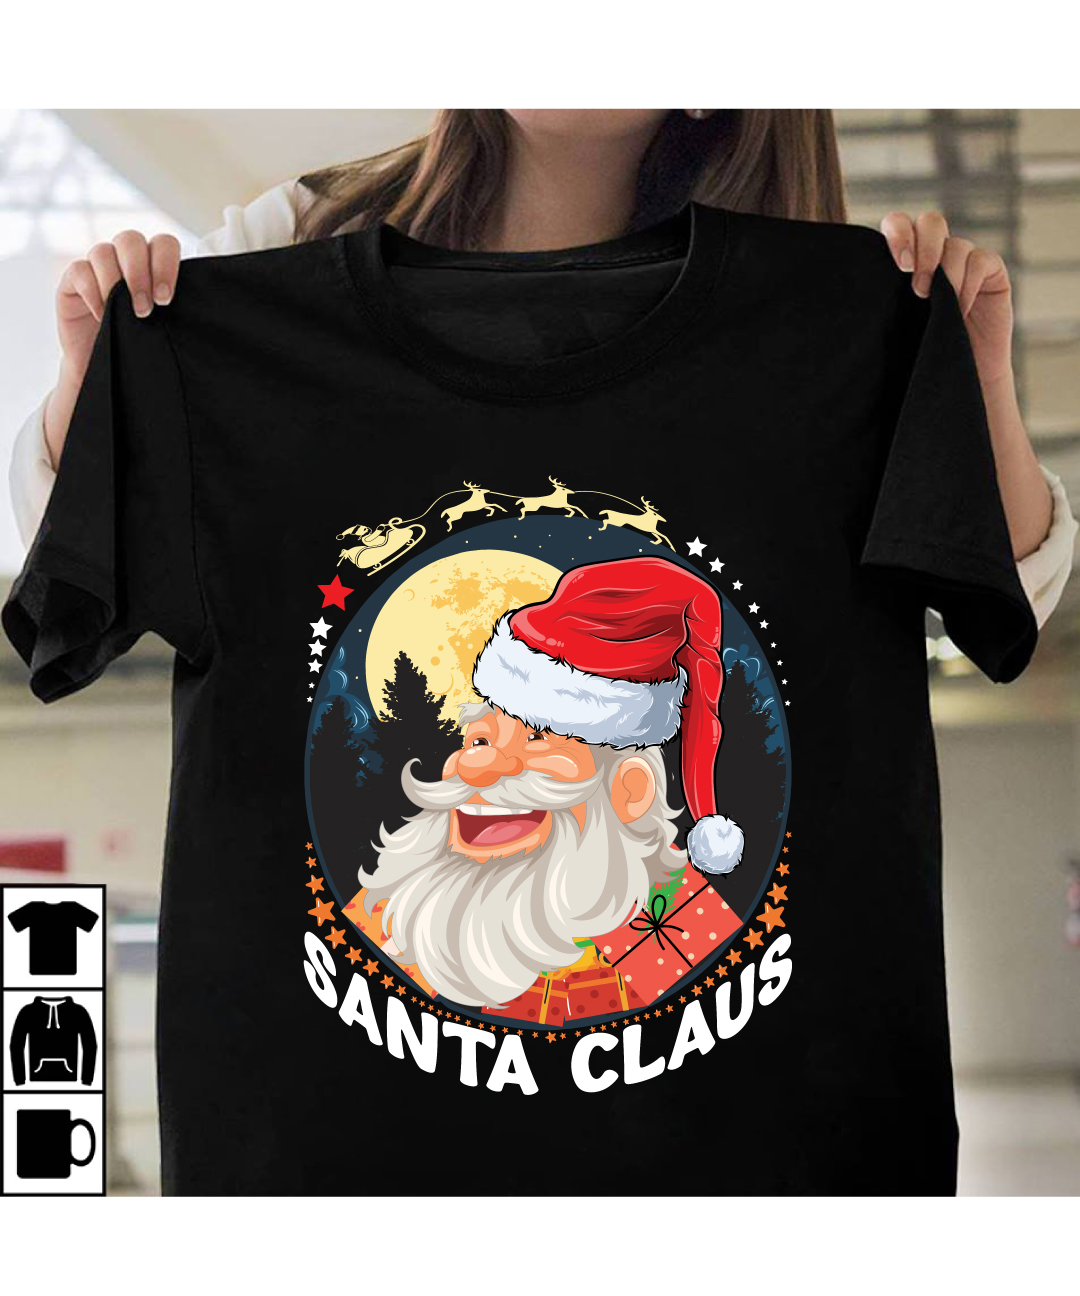 Premium Vector  Merry christmas character santa claus in glasses with  garland and text ho ho ho and merry christmas